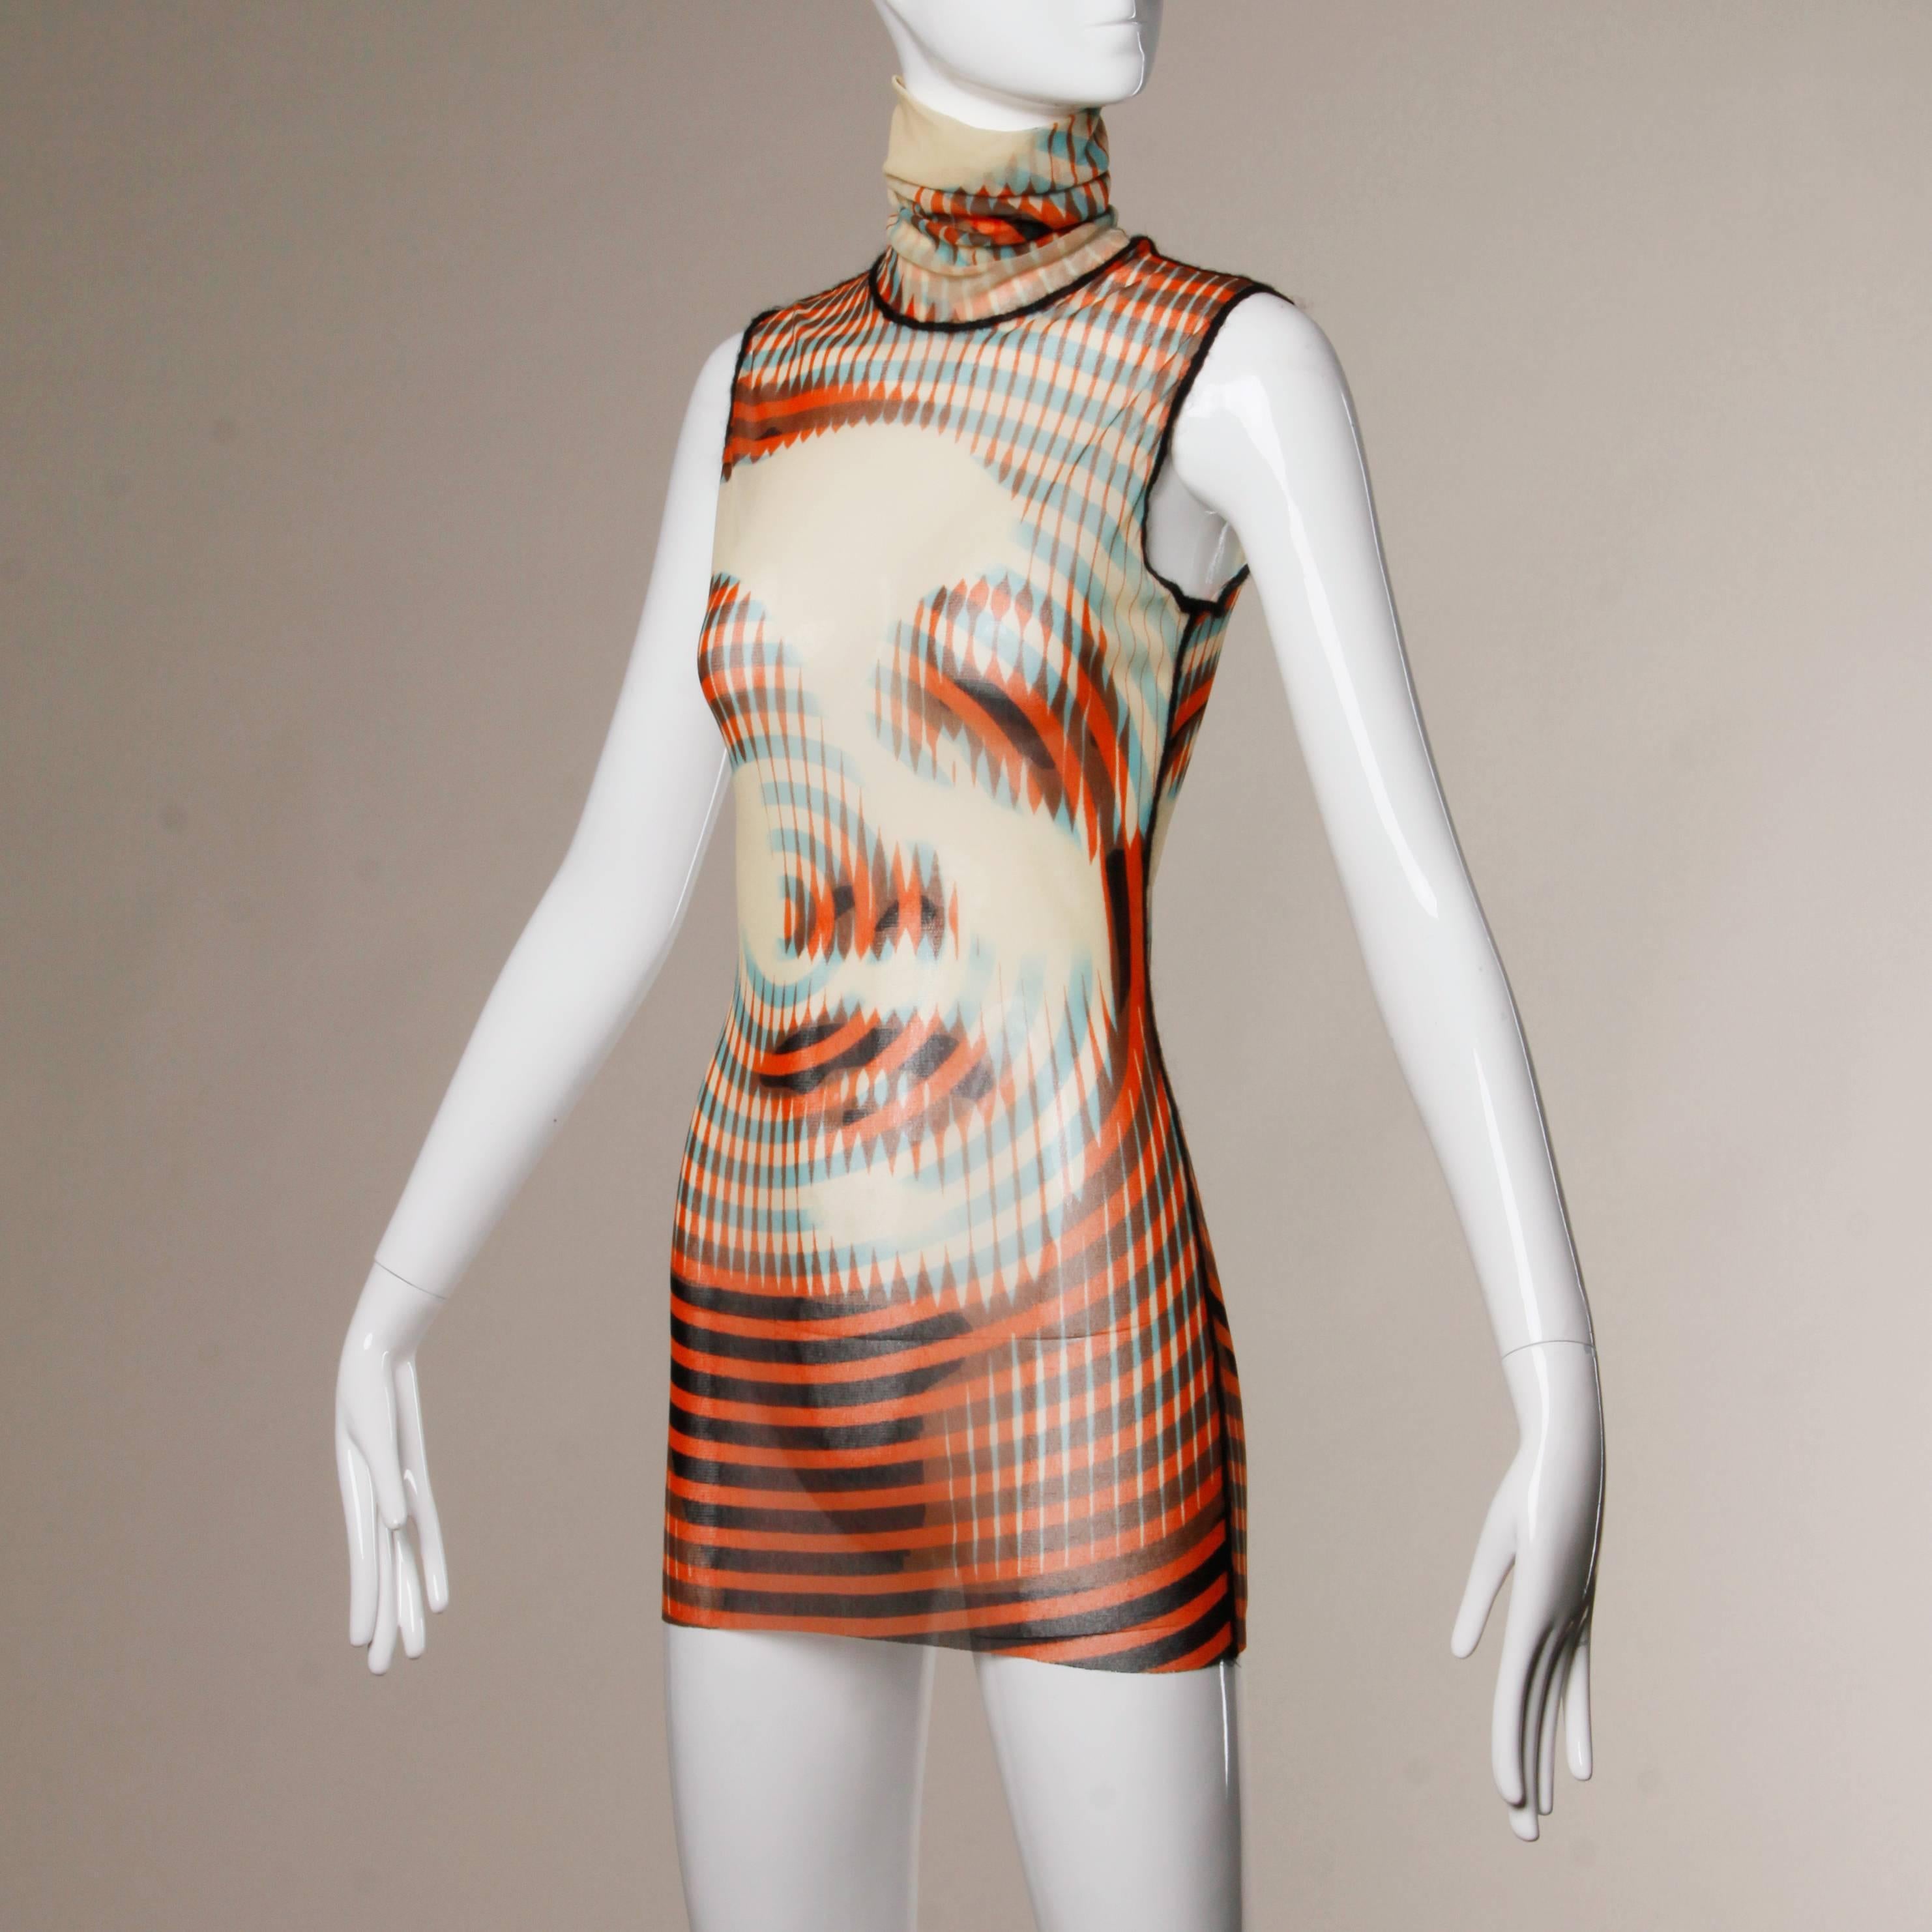 Iconic Jean Paul Gaultier turtle neck mesh top with an optical illusion graphic of a woman's face. The fabric content is not marked but it feels like nylon. Made in Italy. The marked size is medium. Please note that there is a small break in the